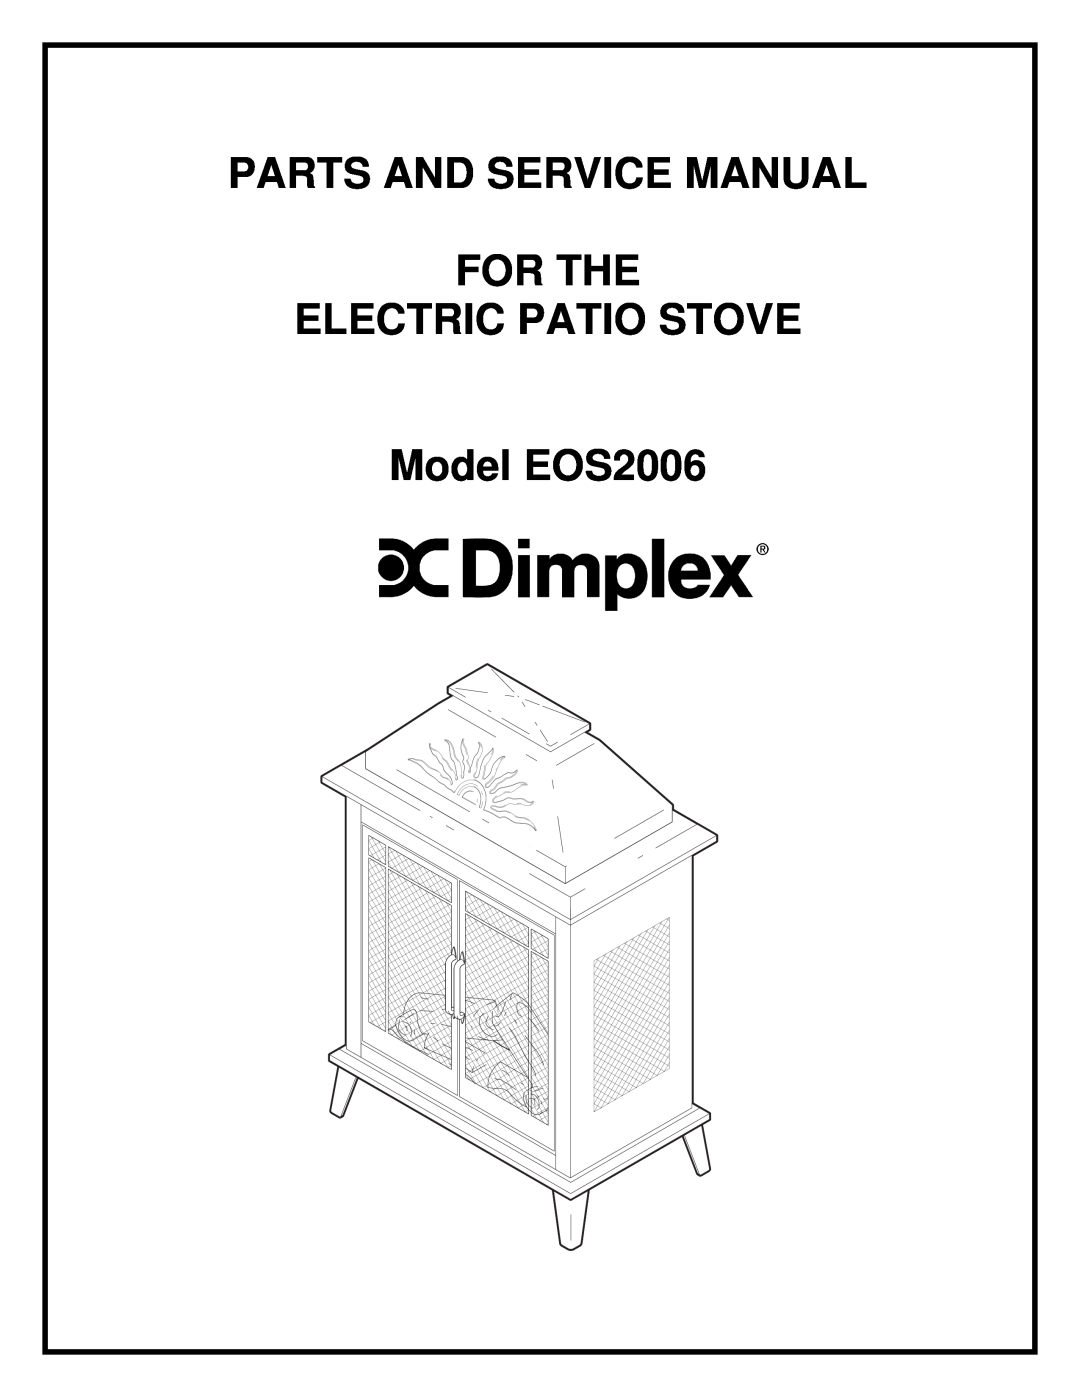 Dimplex service manual Parts And Service Manual, For The, Electric Patio Stove, Model EOS2006 